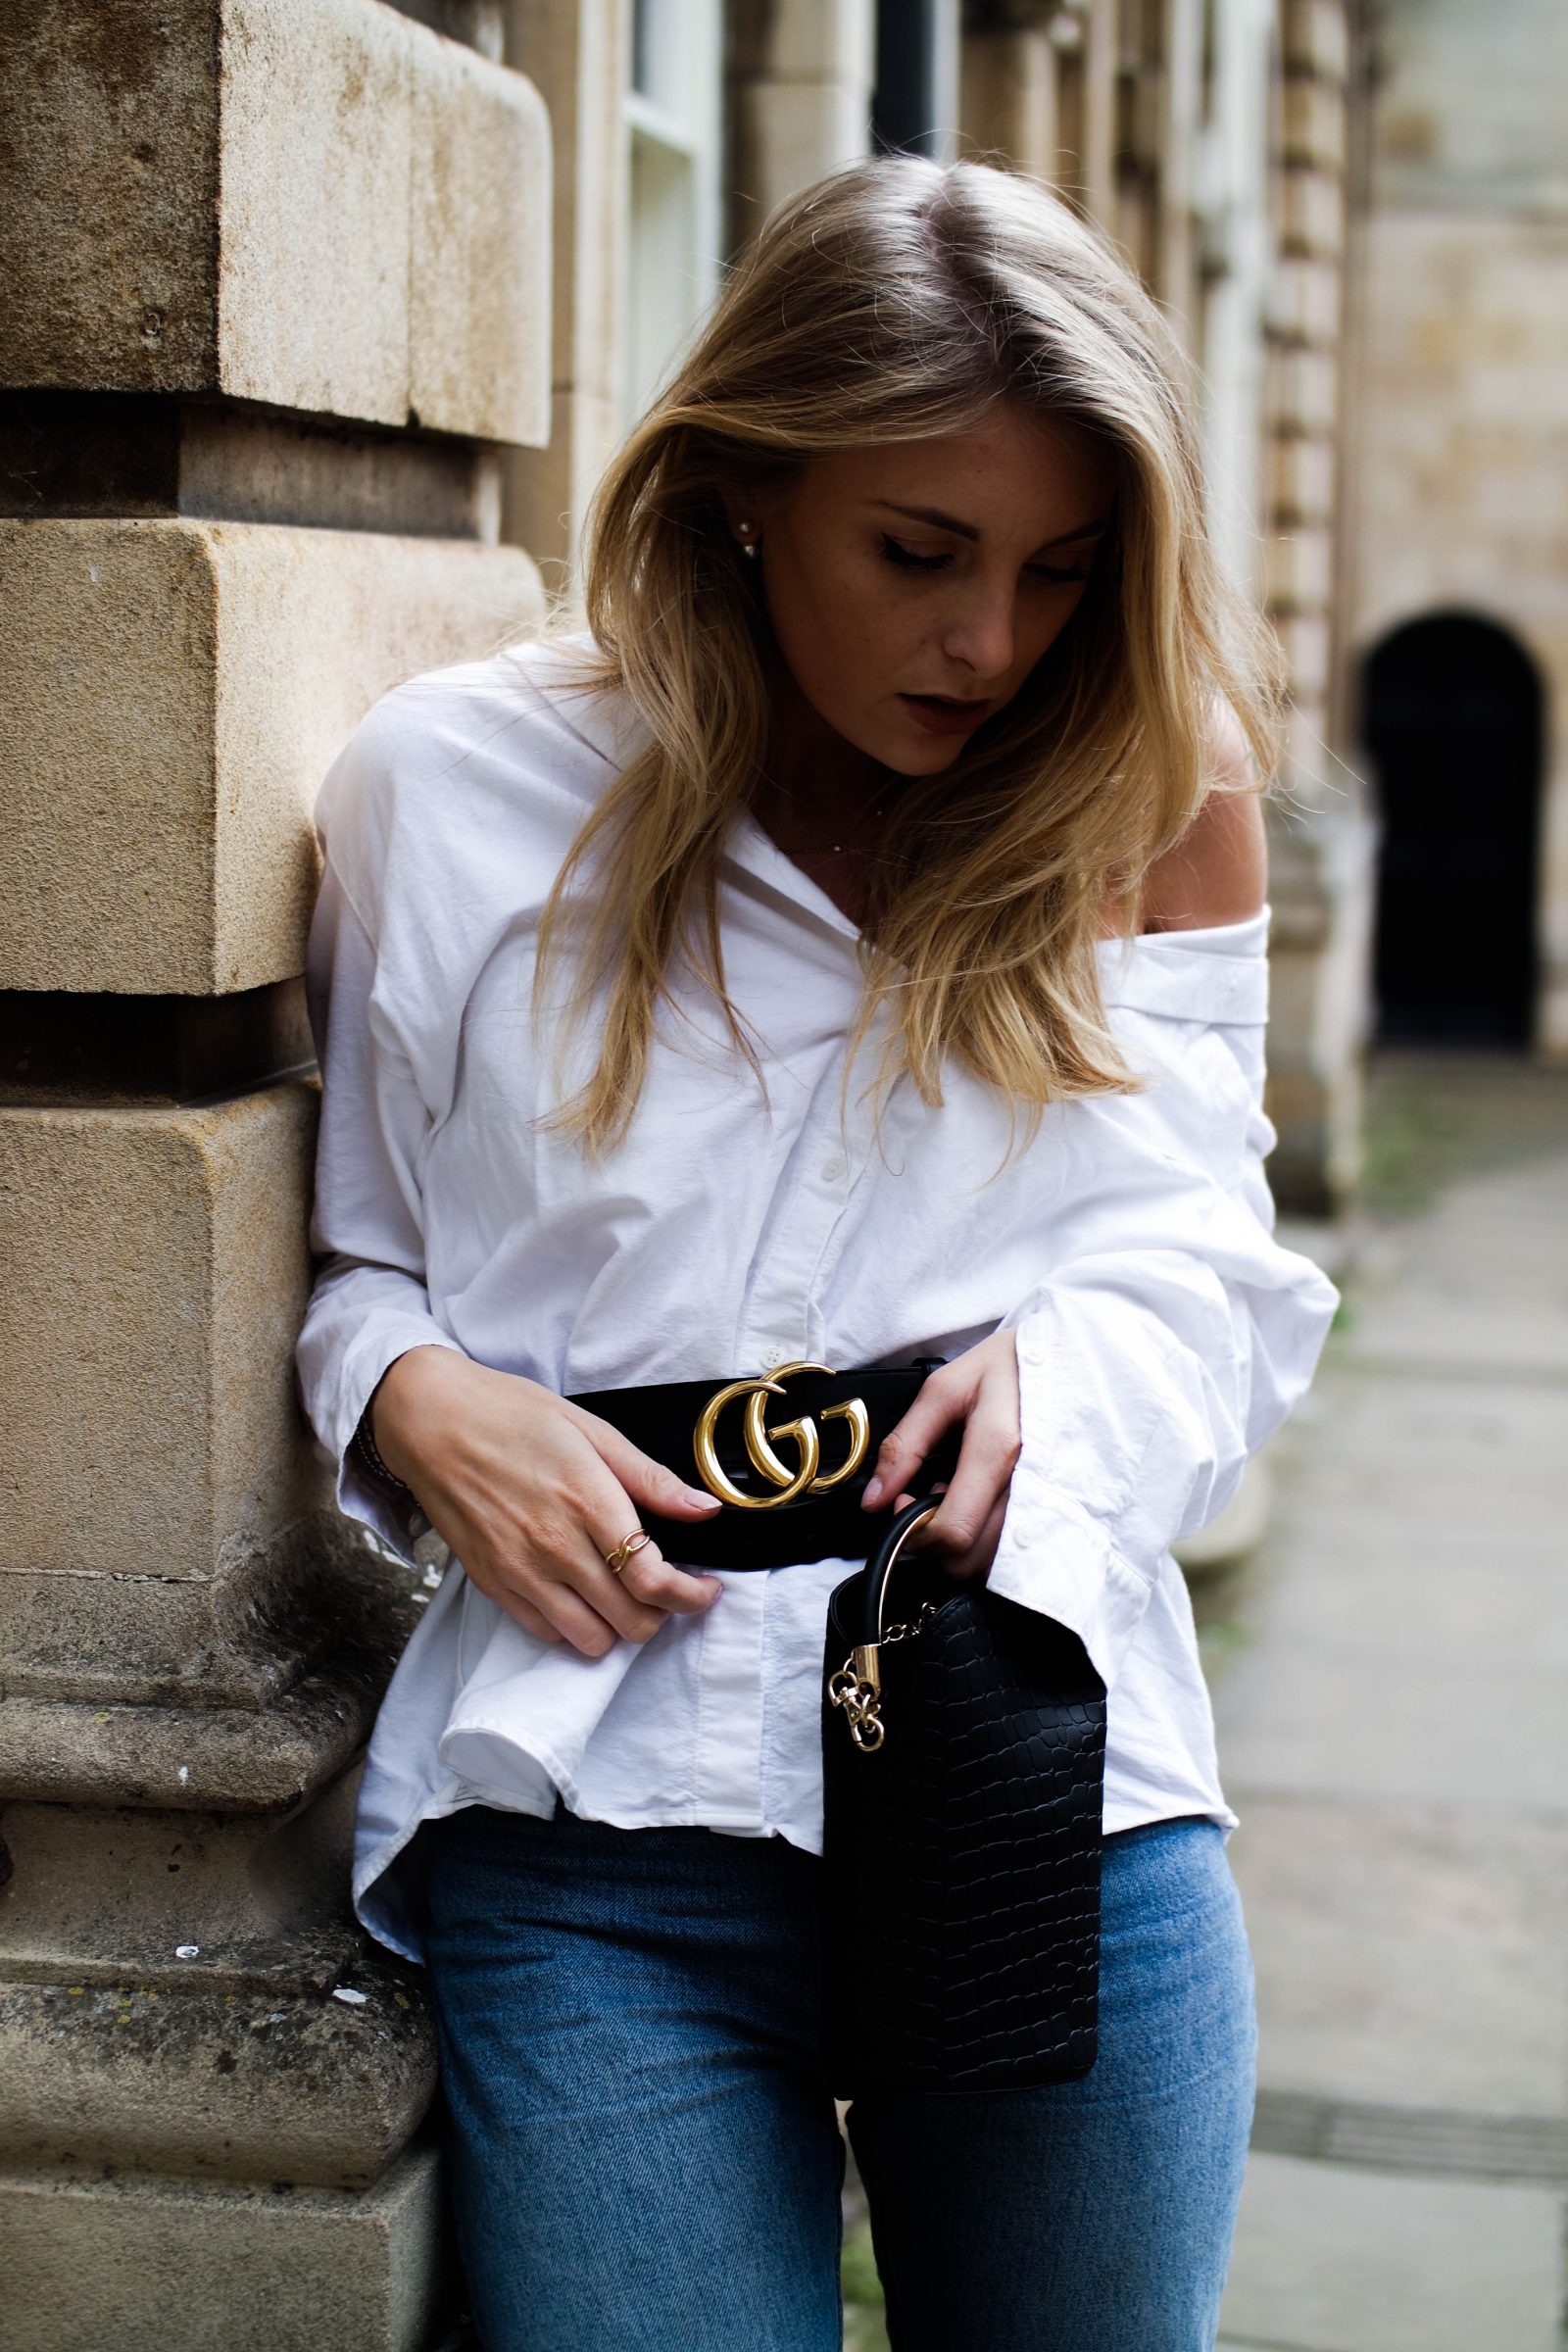 The New Way To Wear Your Statement Belt - Blogger Spring Street Style 